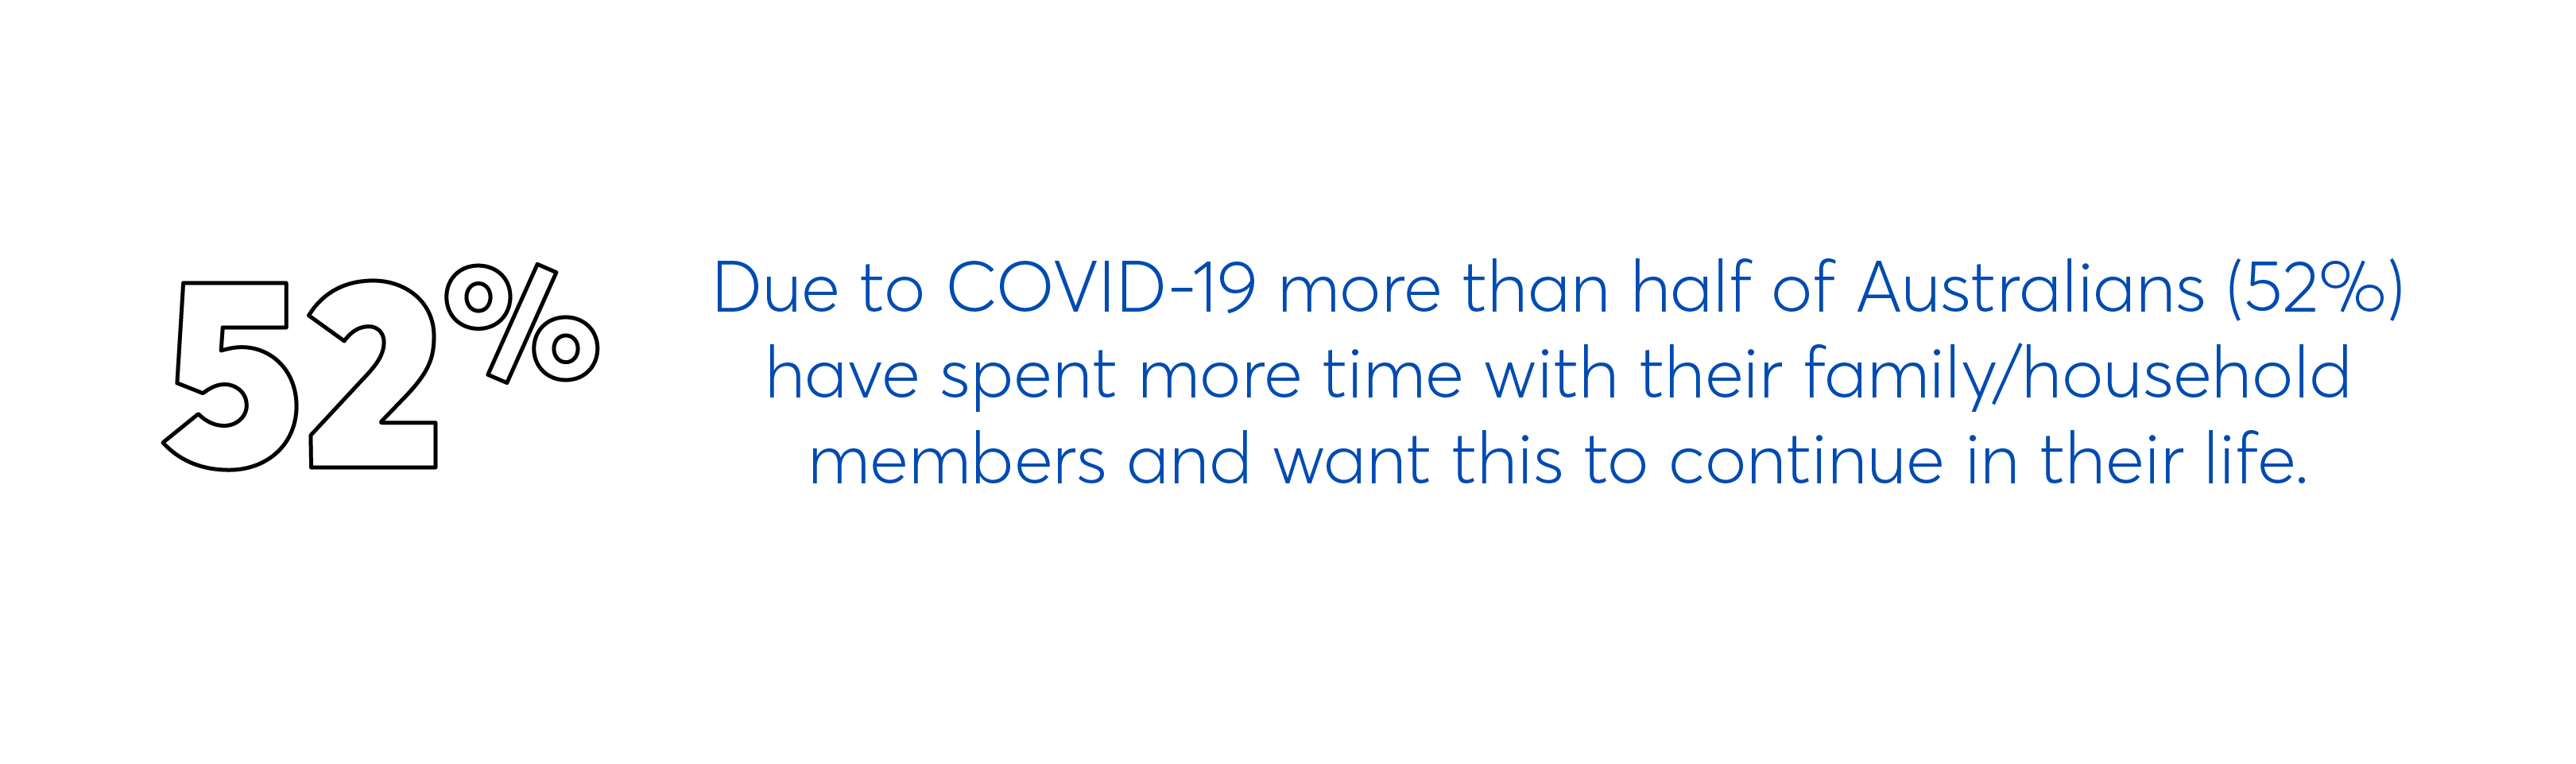 Australians spent more time with their families through COVID-19